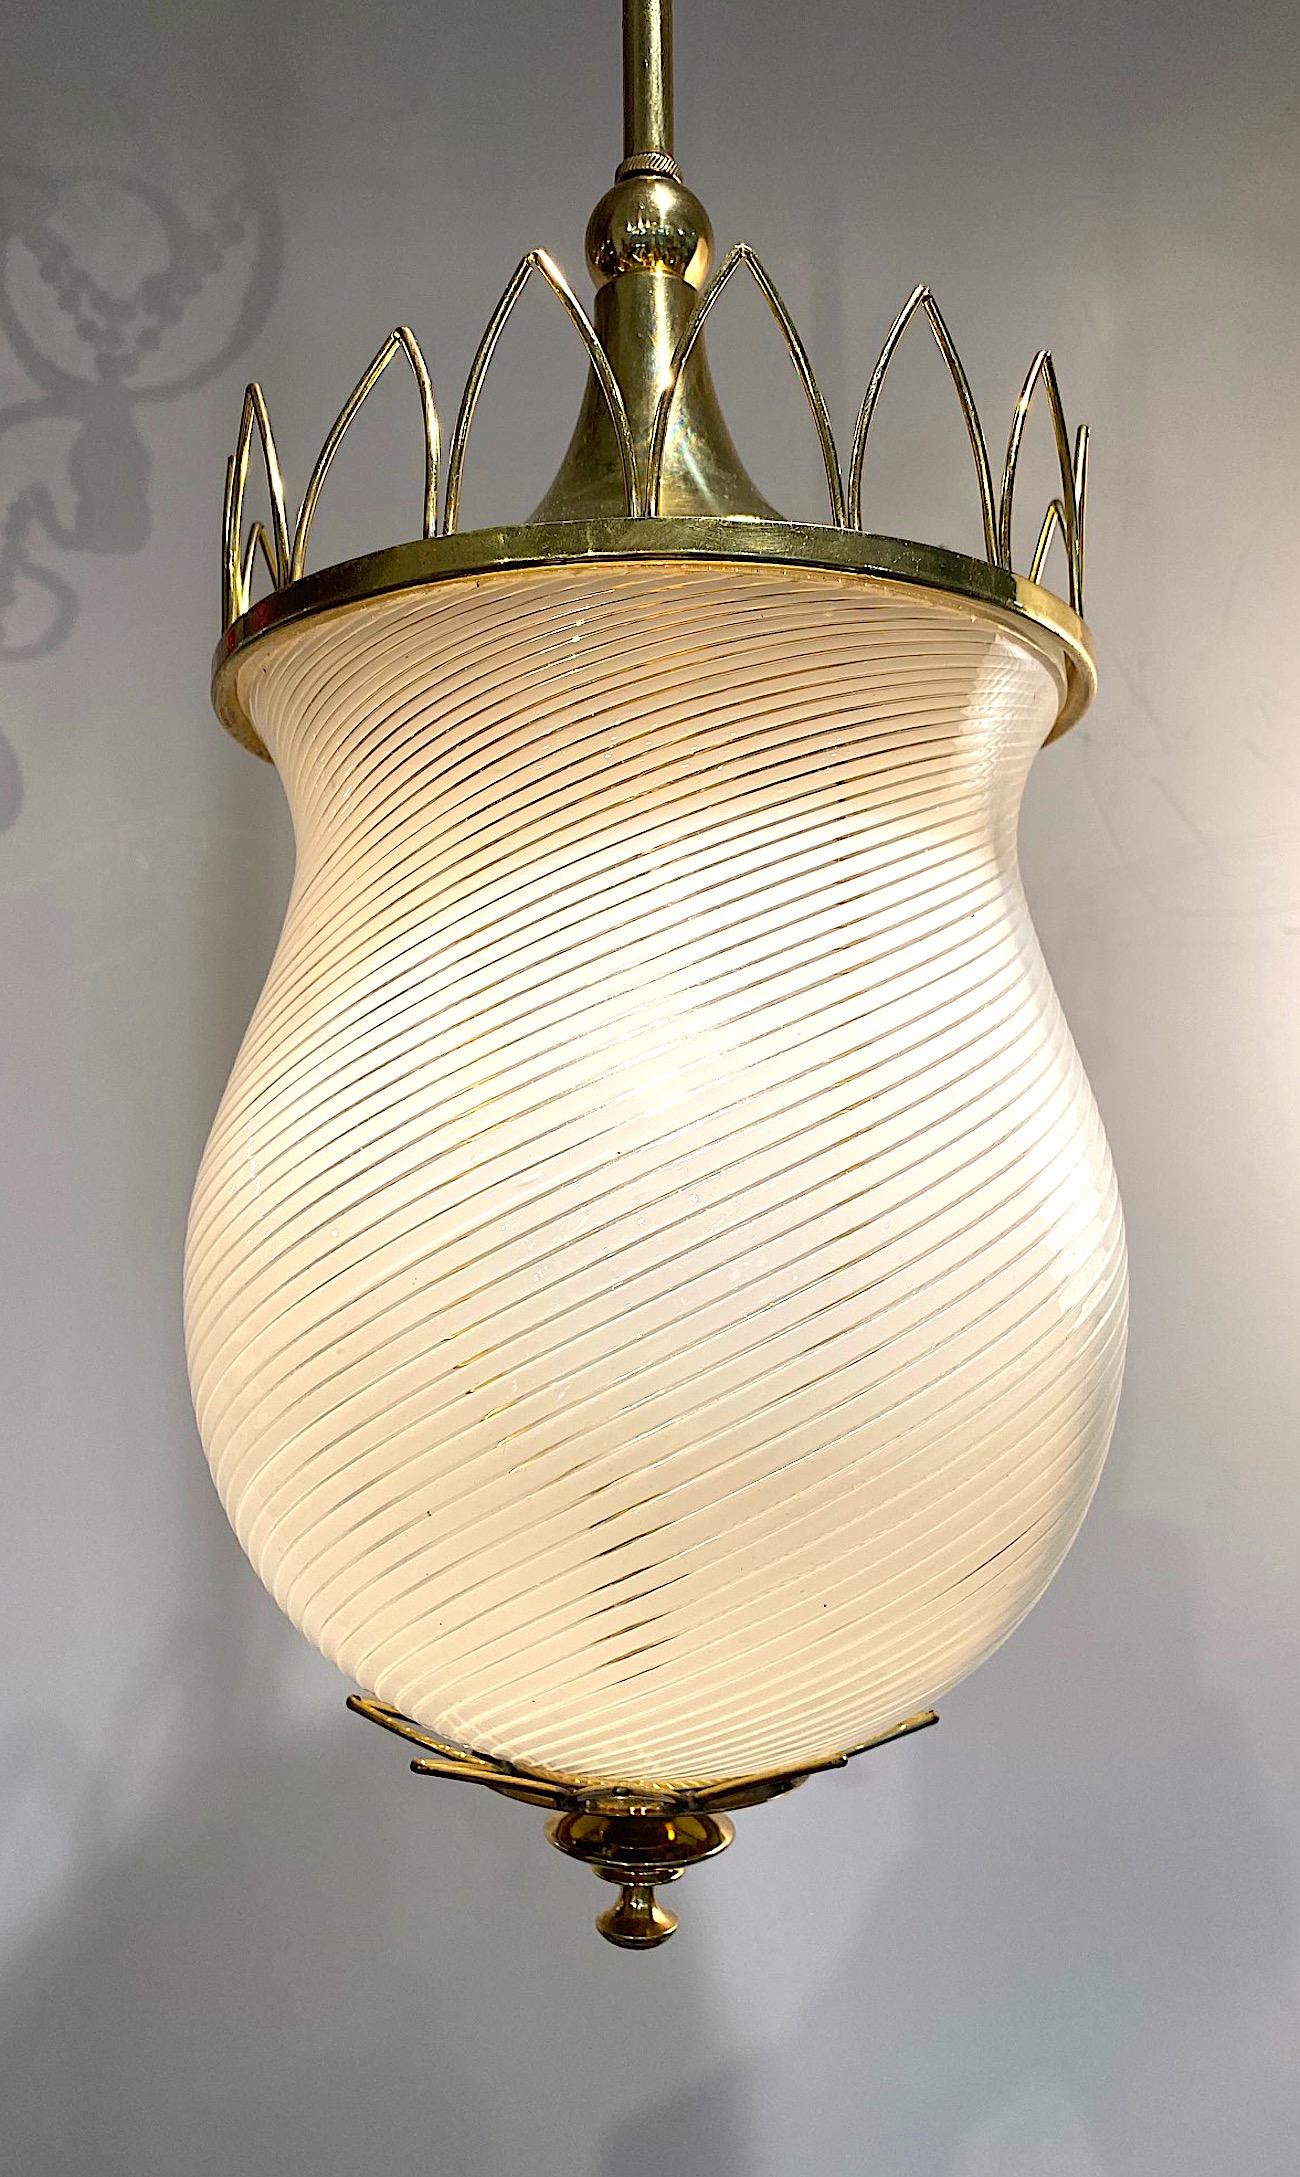 Charming late 1940s to mid 1950s Italian pendant light in brass and glass. The vase shape shade is hand blown Murano glass in clear and white stripe. The lantern is brass that is newly polished and lacquered. The top brass crown design is nicely